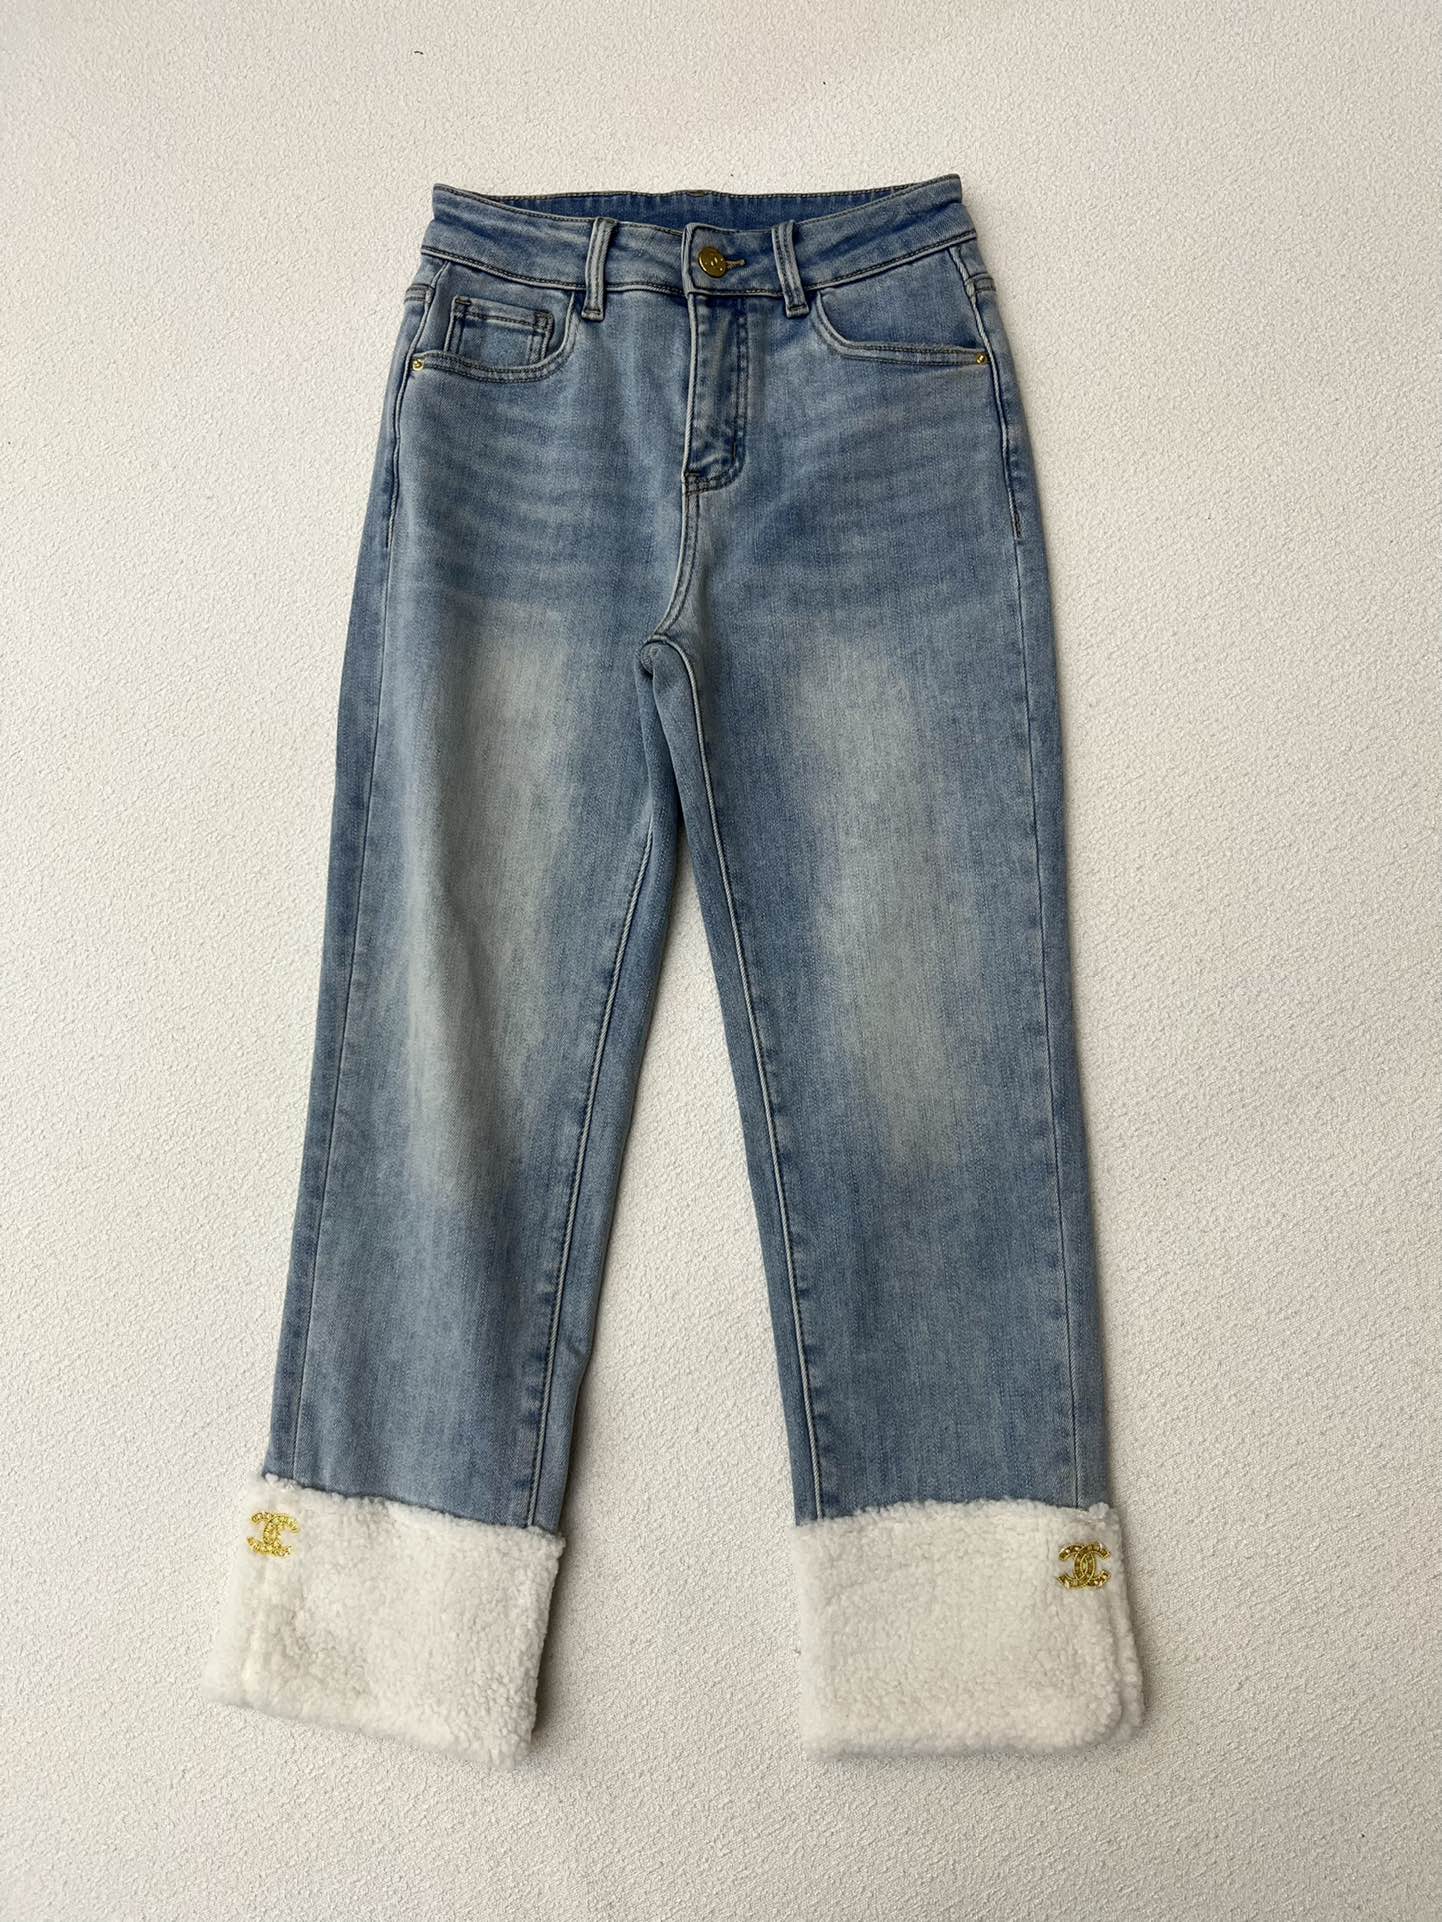 Chanel Clothing Jeans Blue Splicing Denim Lambswool